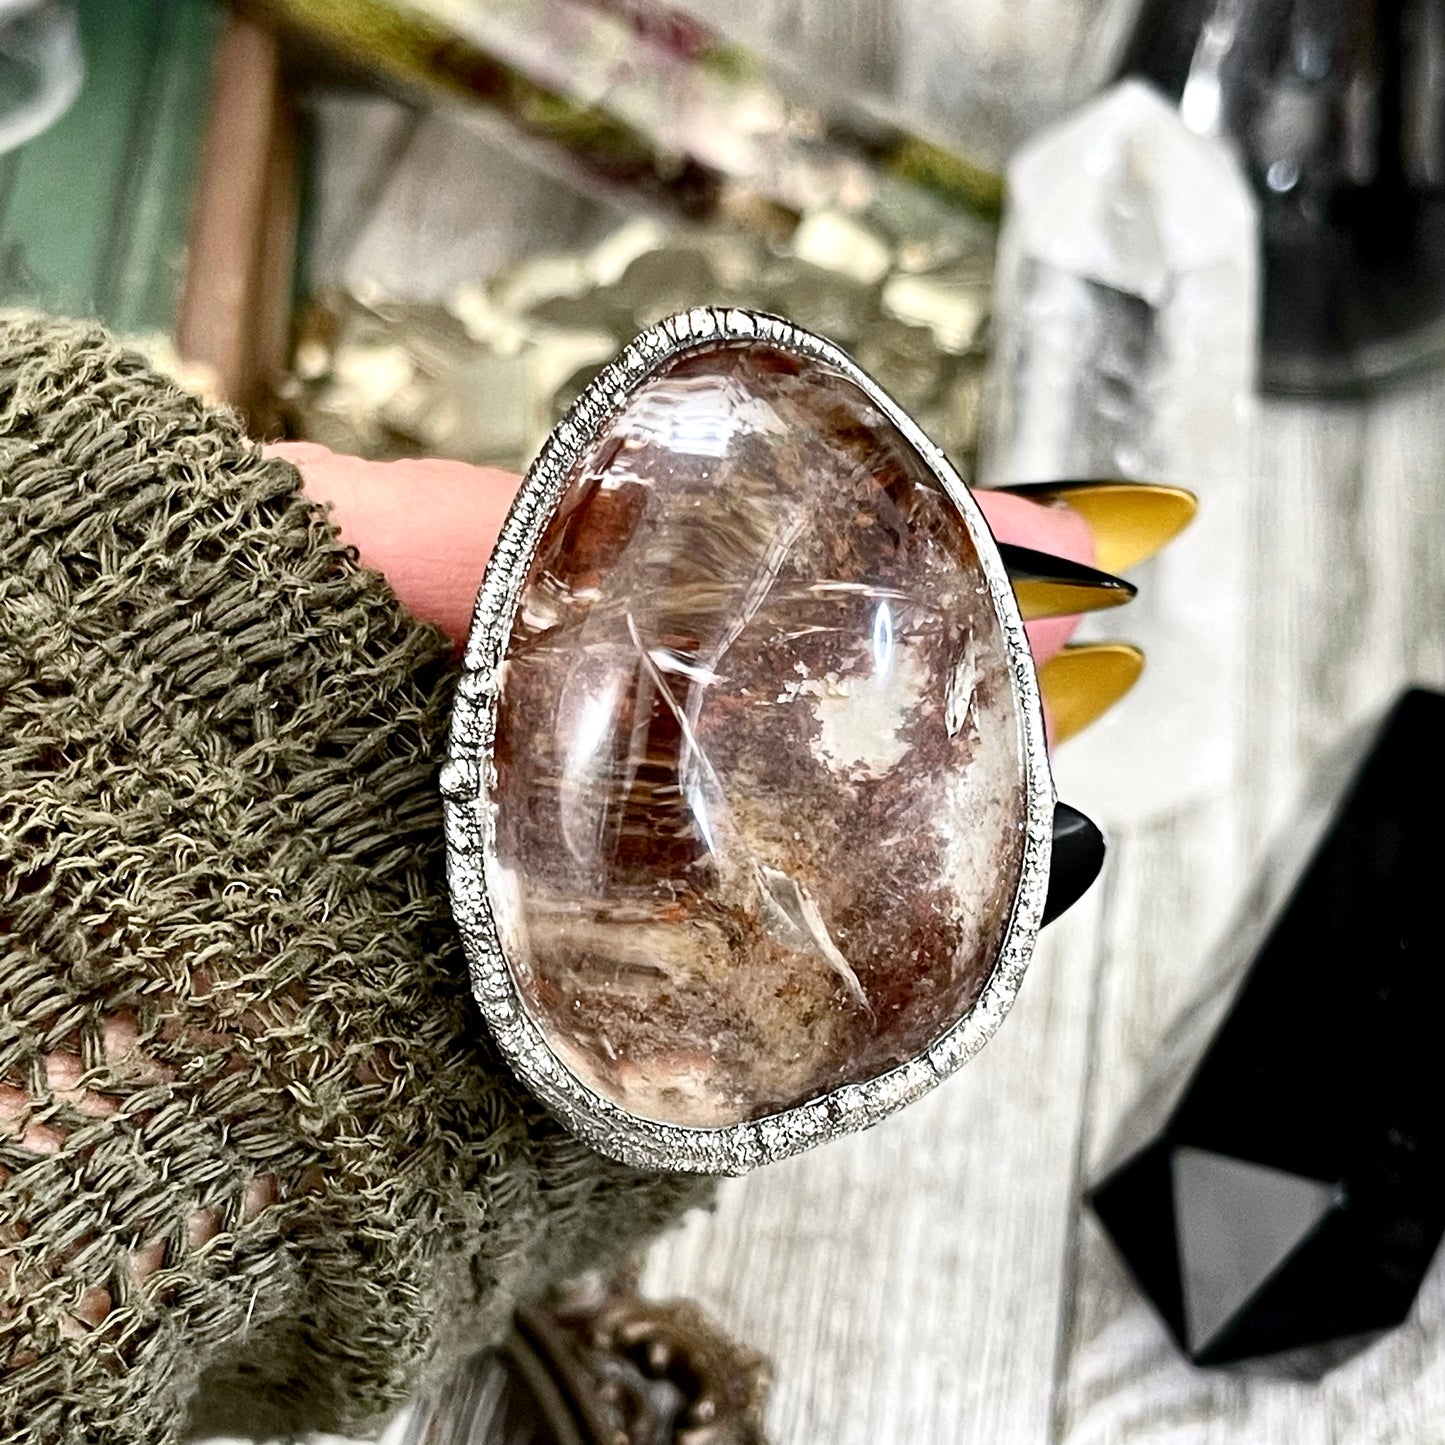 Size 9 BIG Garden Quartz Crystal Statement Ring in Fine Silver / Foxlark Collection - One of a Kind